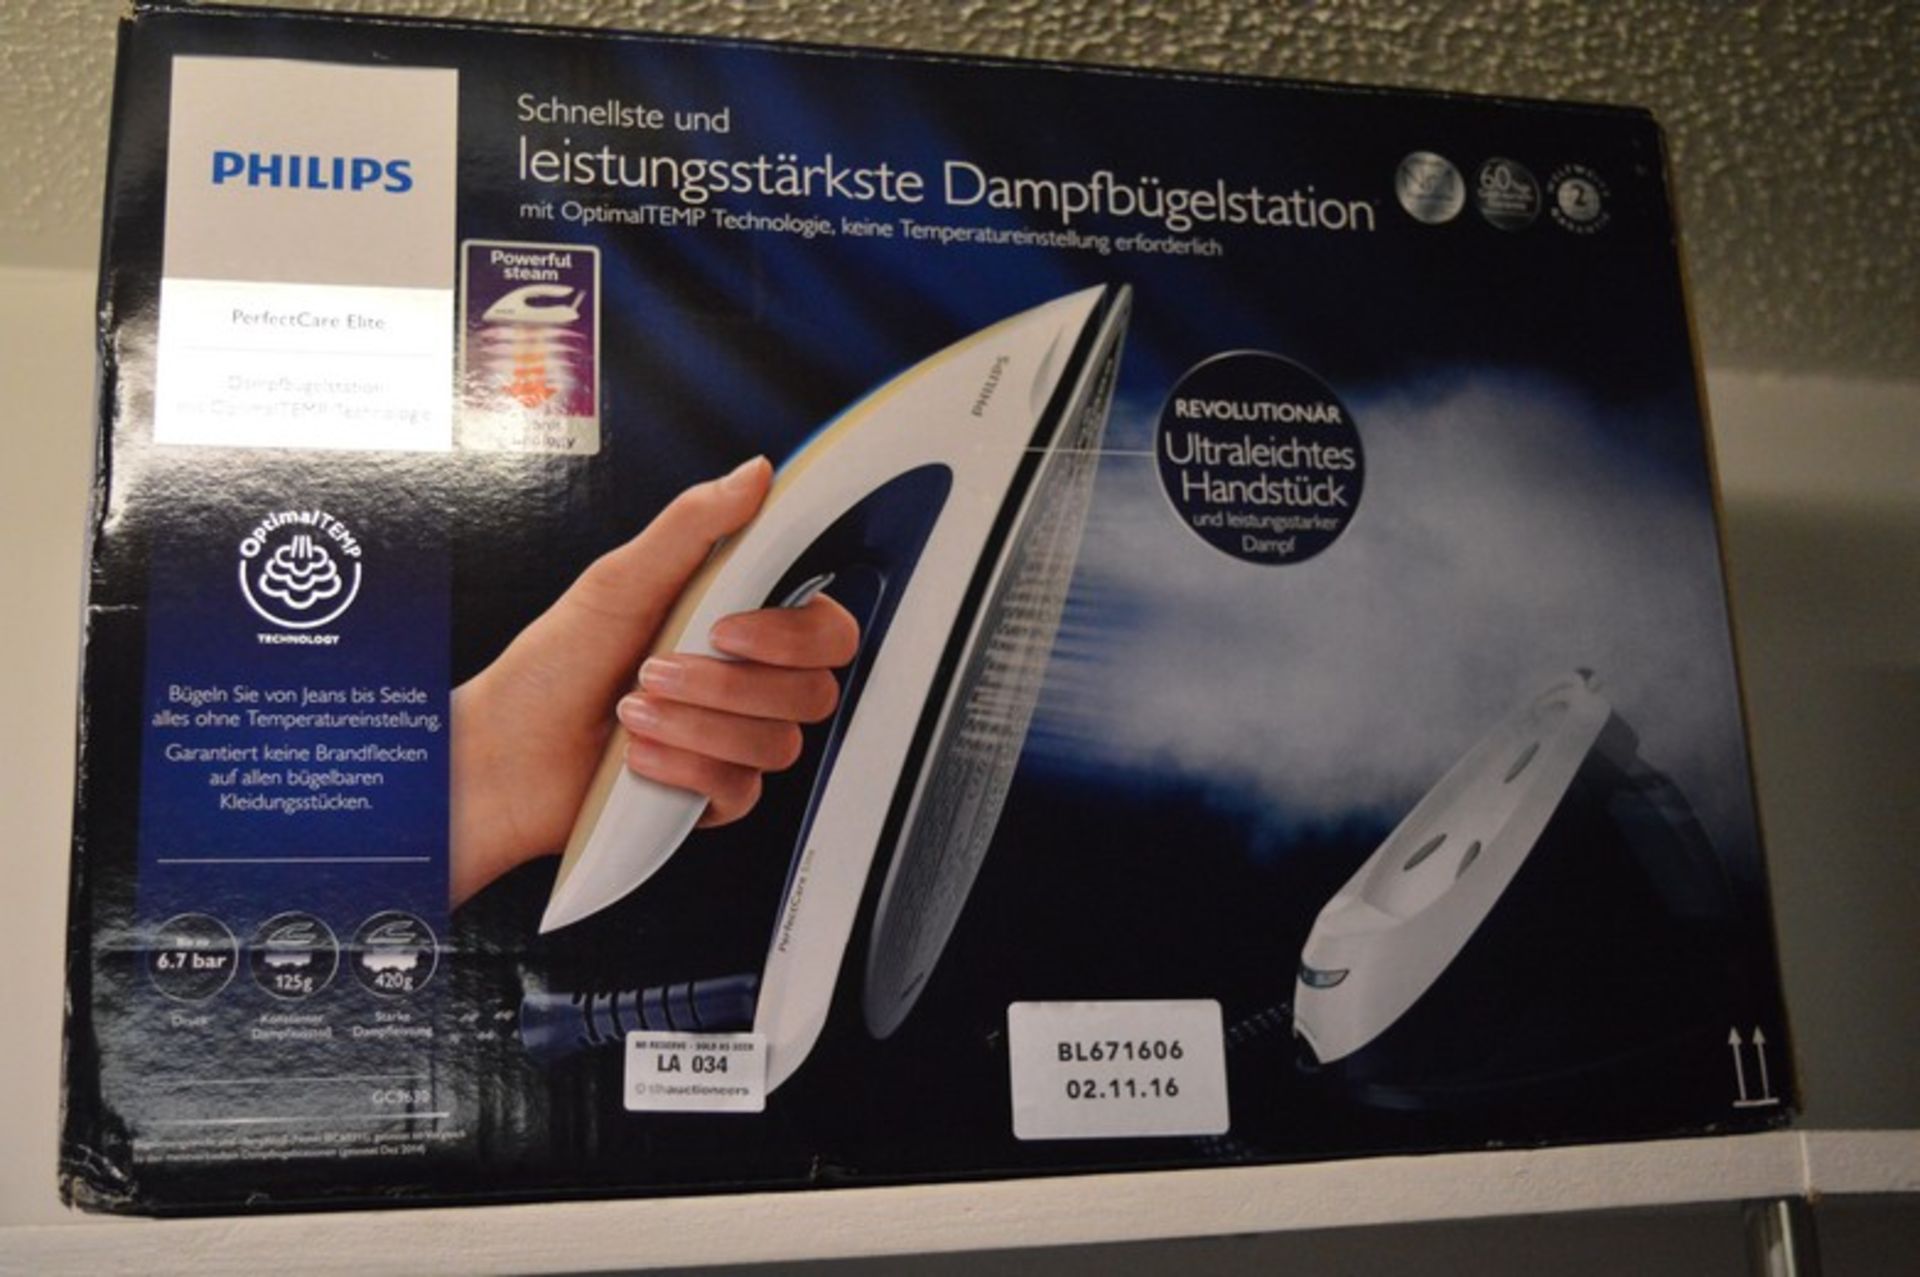 1 x BOXED PHILIPS PERFECT CARE ELITE STEAM GENERATING IRON RRP £120 02.11.16 *PLEASE NOTE THAT THE